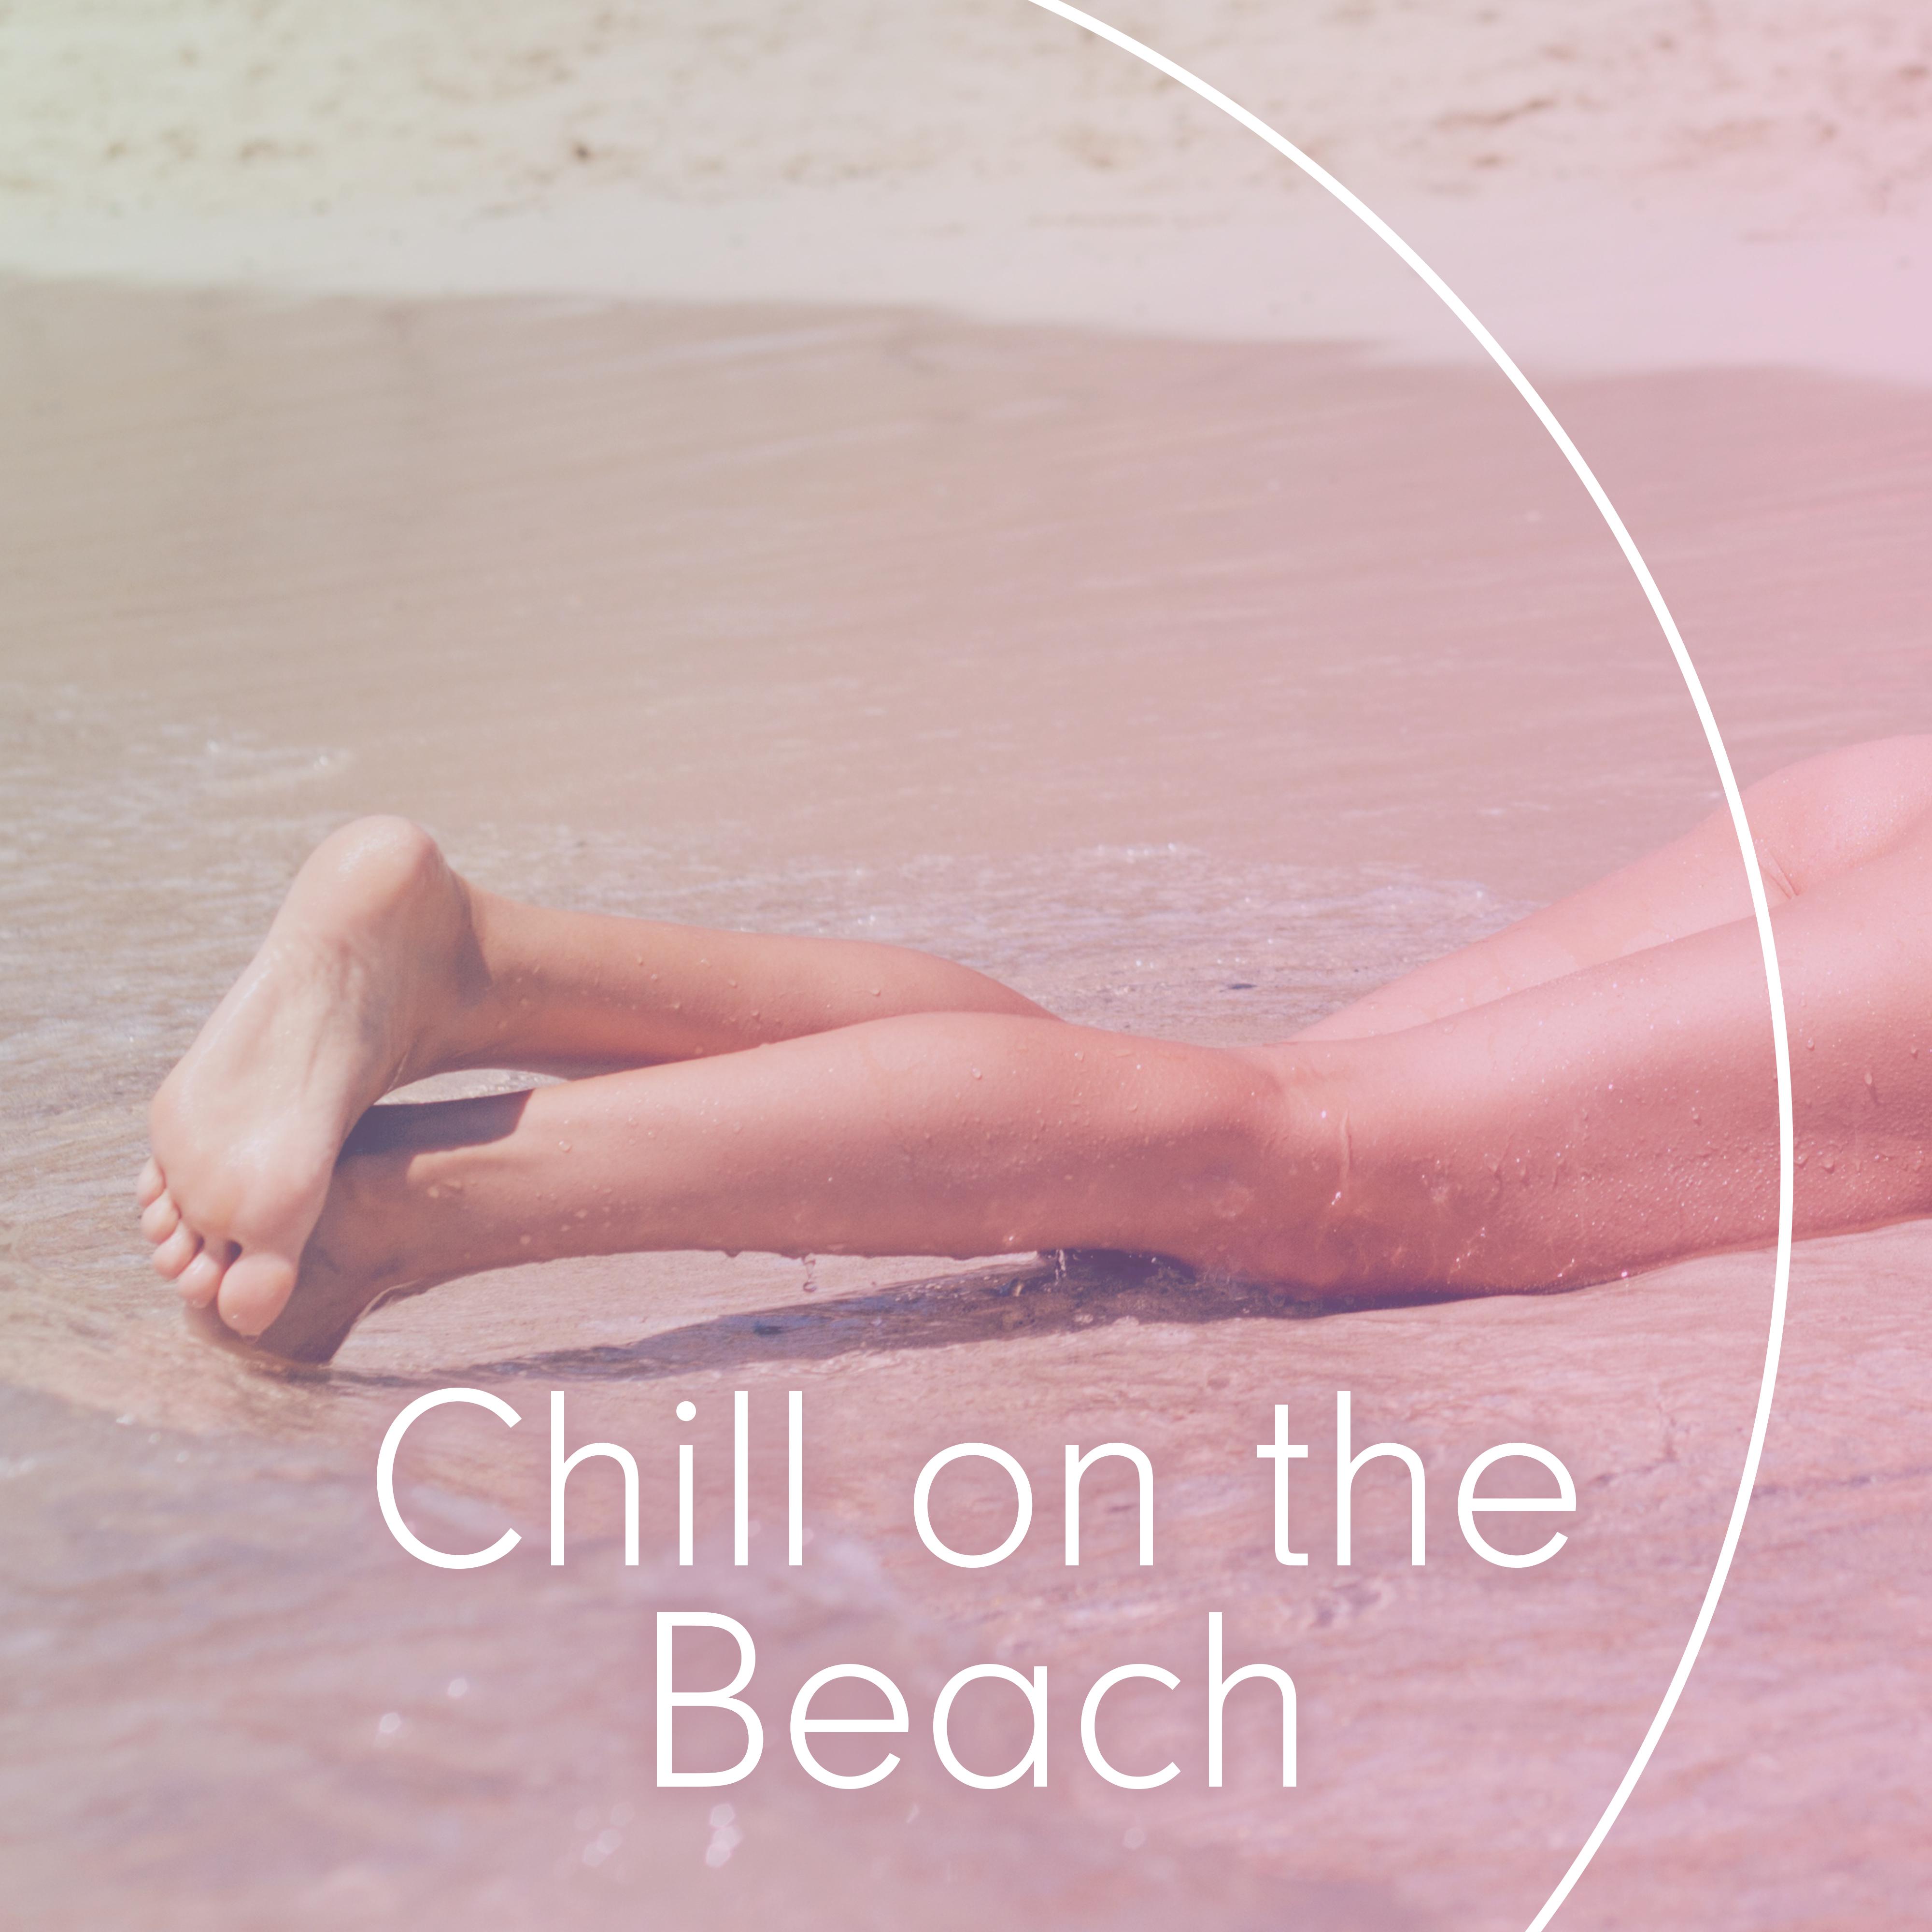 Chill on the Beach  Summer Music, Holiday Relaxation, Ibiza Lounge, Sounds to Help You Relax